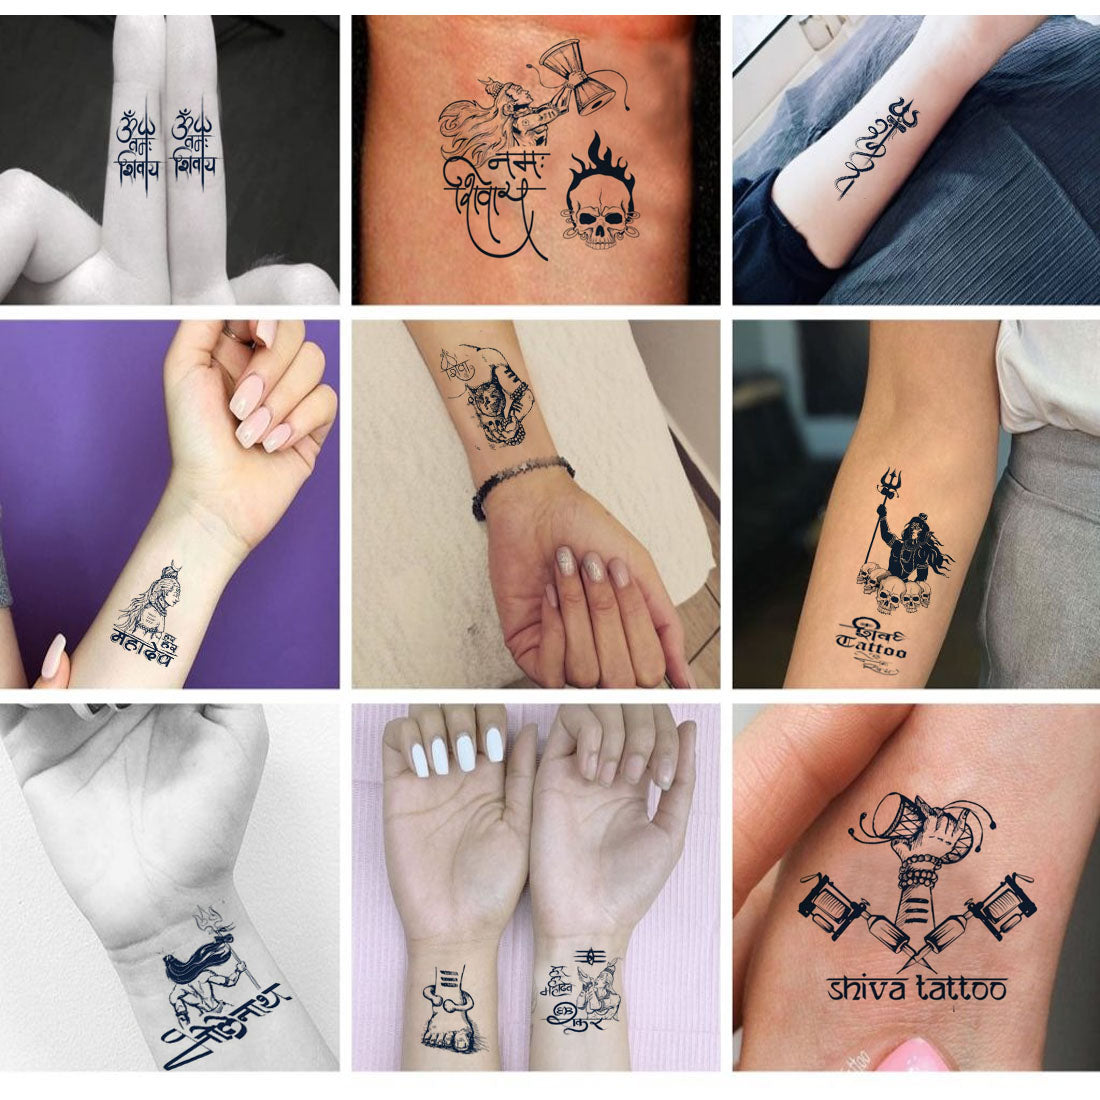 Hk Inks Tattoos in Khajrana,Indore - Best Tattoo Parlours in Indore -  Justdial